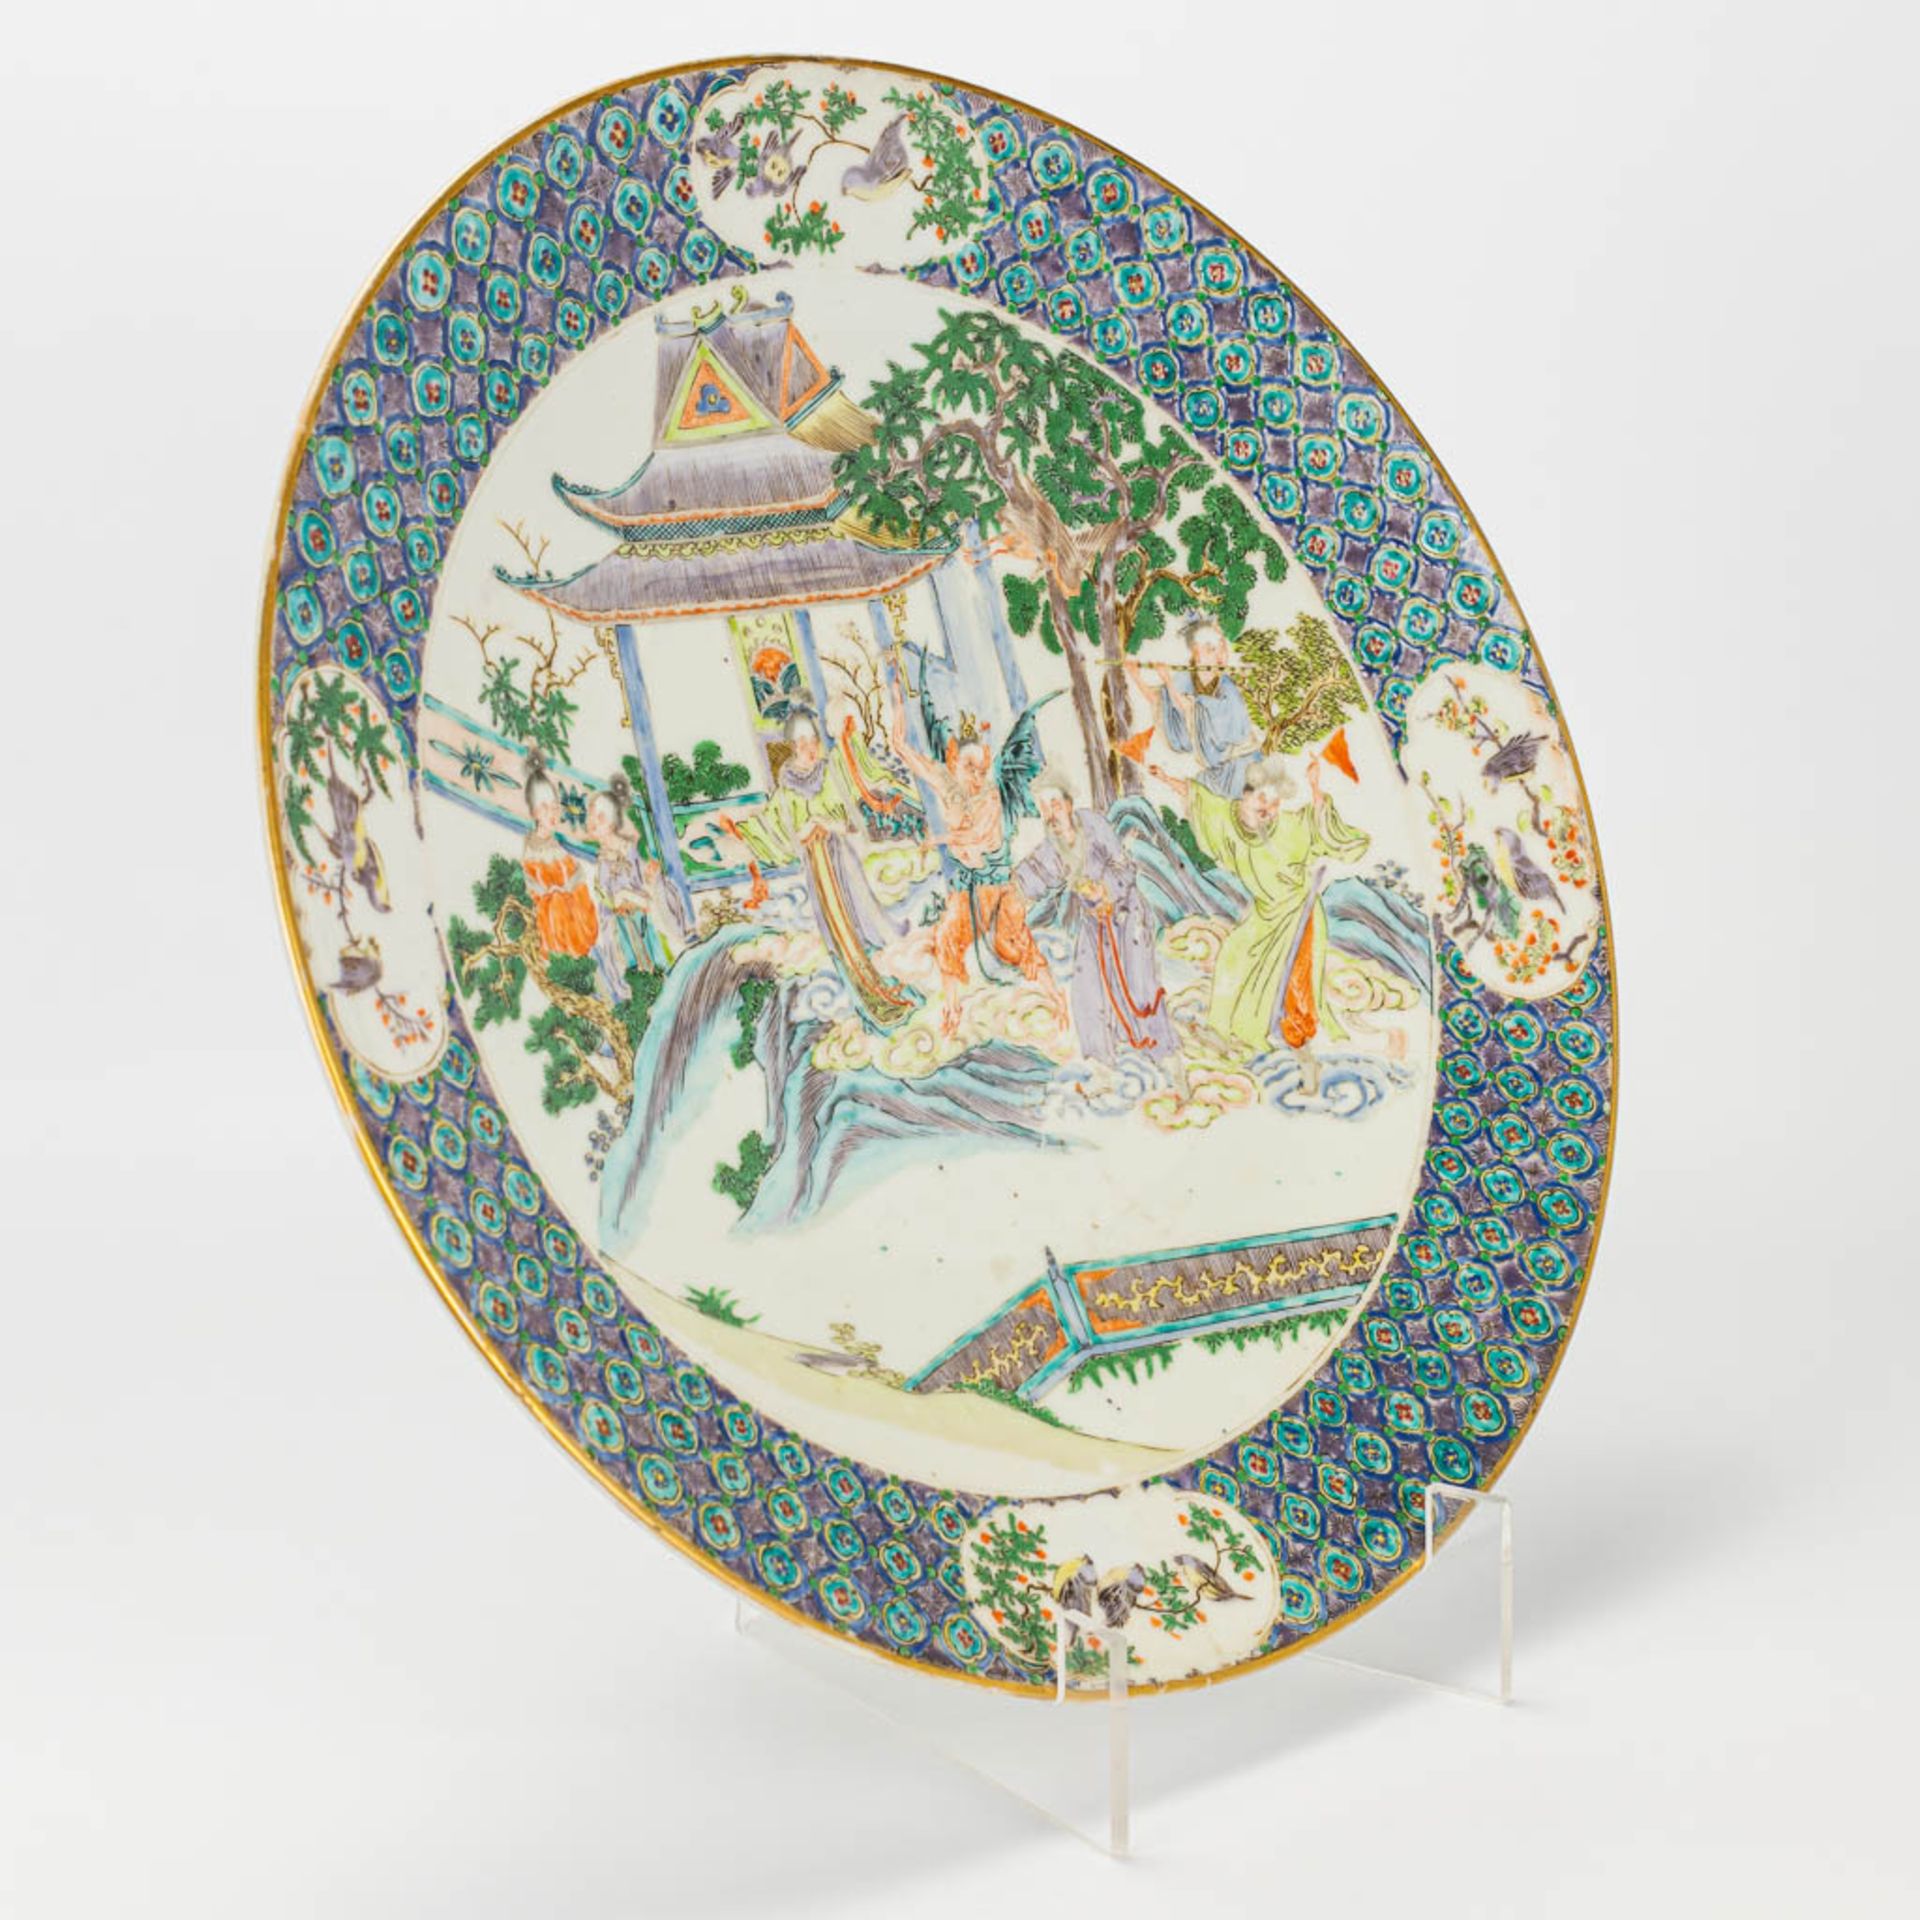 A pair of plates made of Chinese porcelain in Kanton style. 19th century. - Image 8 of 24